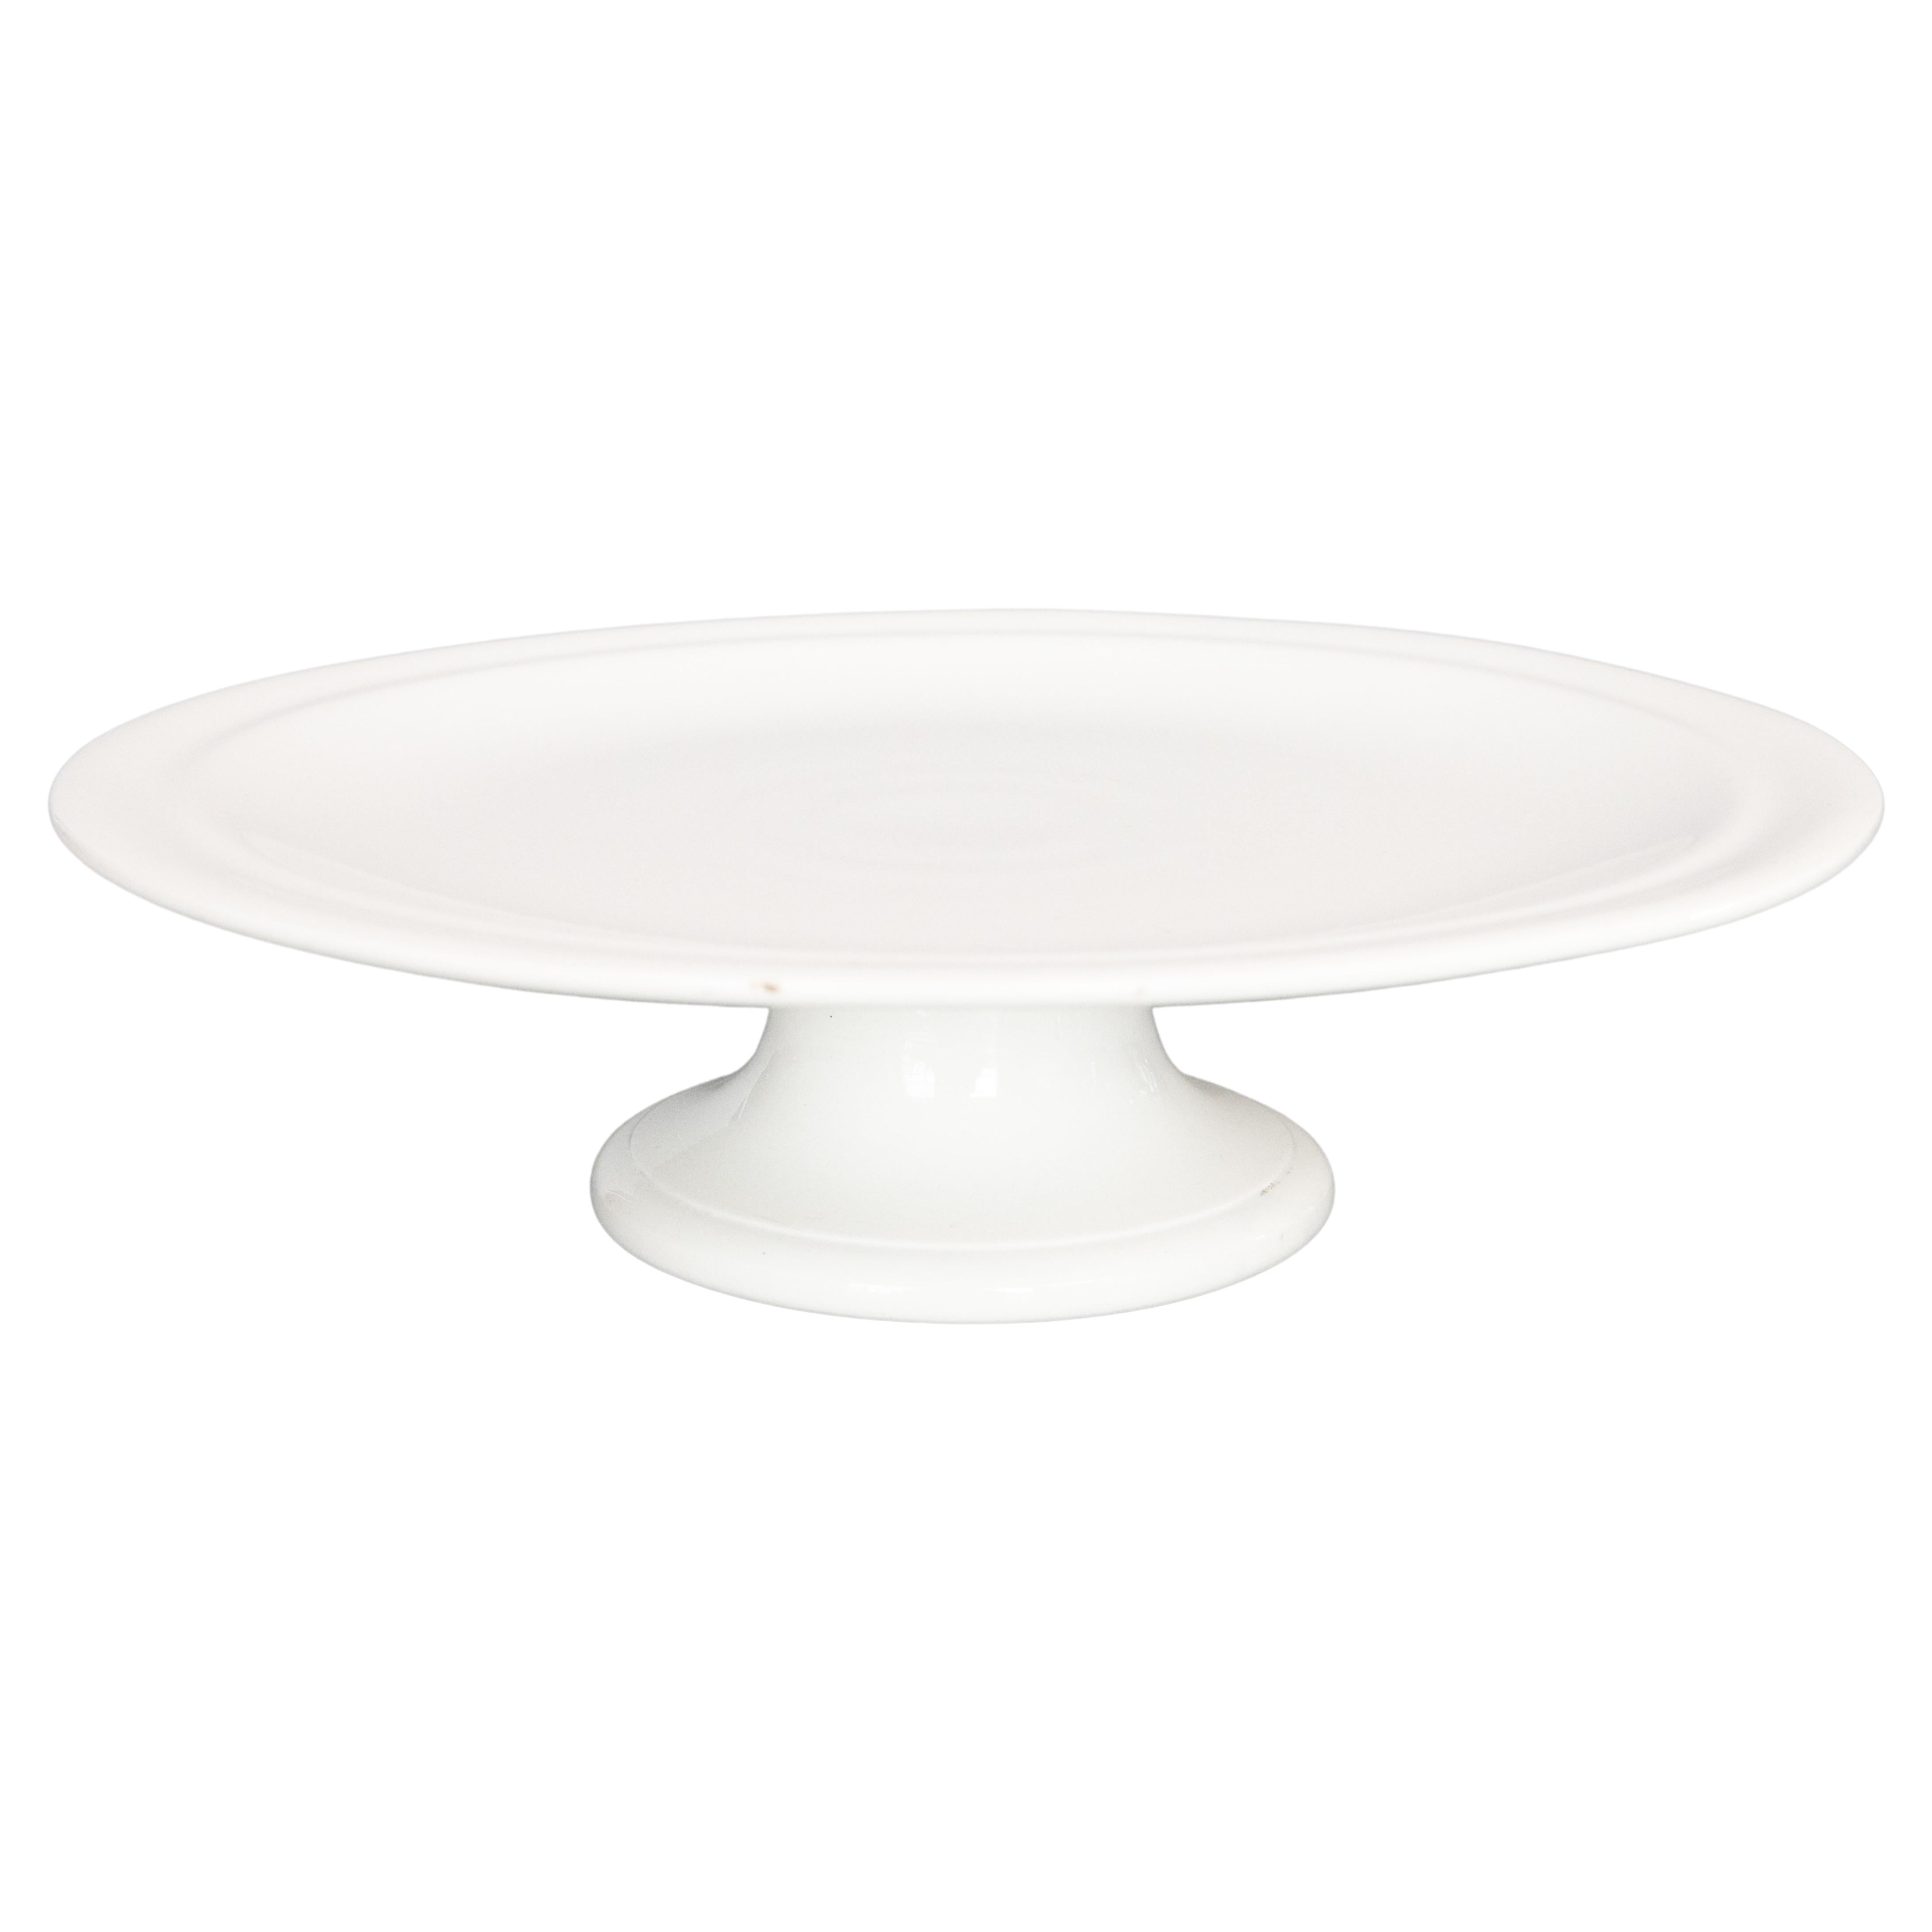 19th Century Belgian White Ironstone Cake Stand For Sale